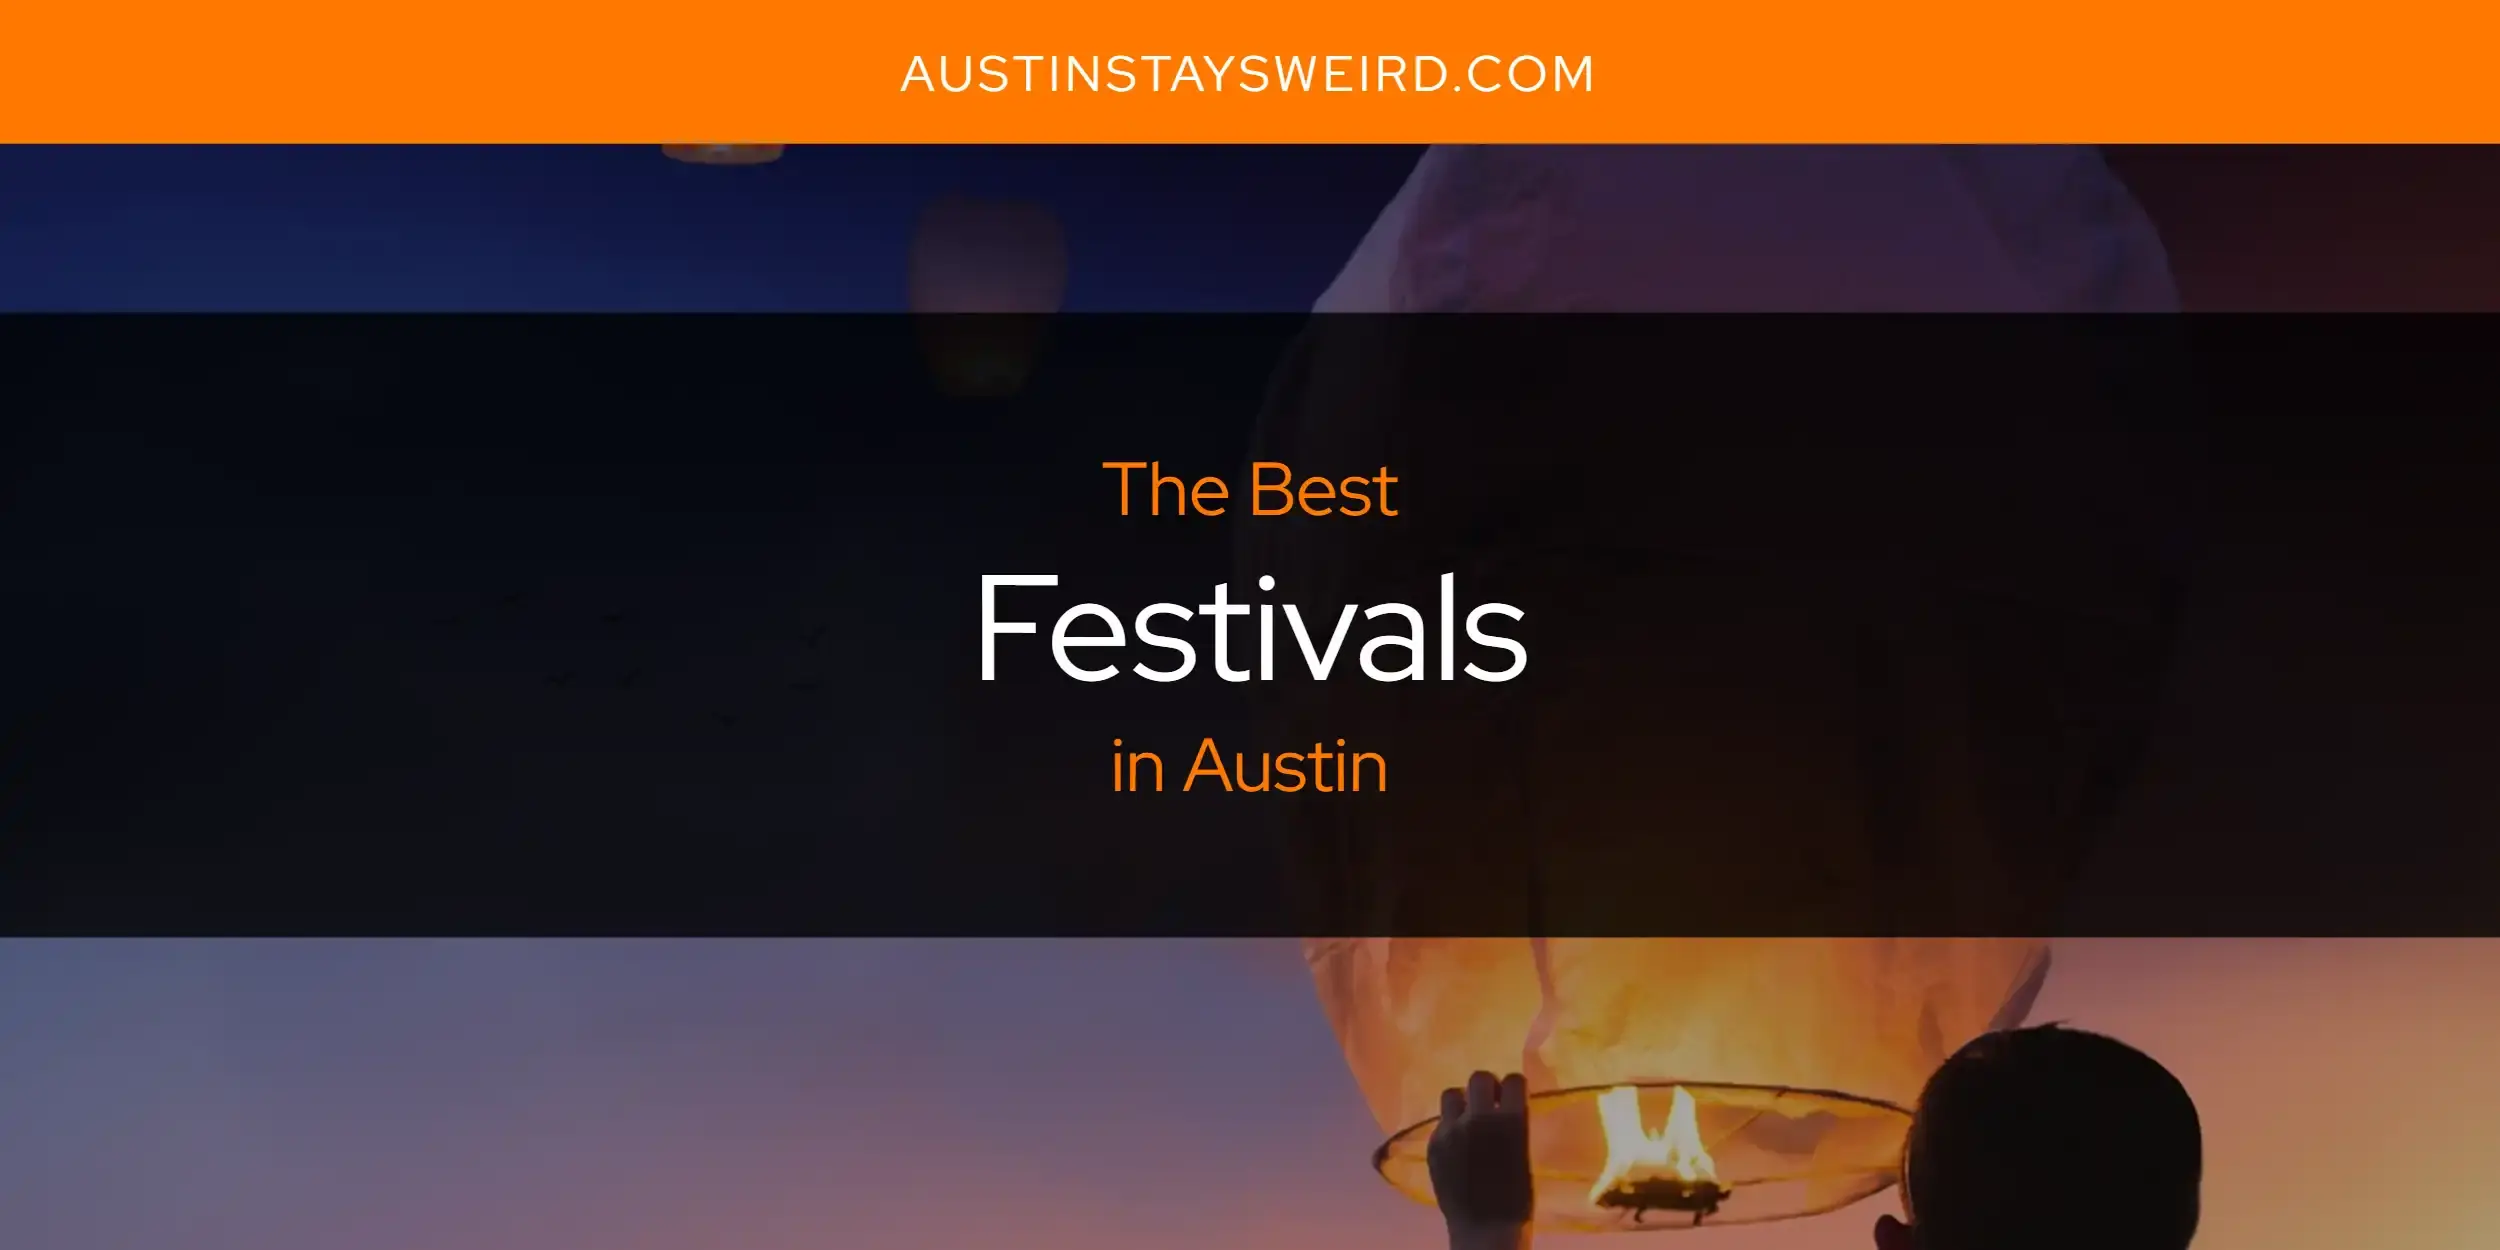 Best Festivals in Austin? Here's the Top 8